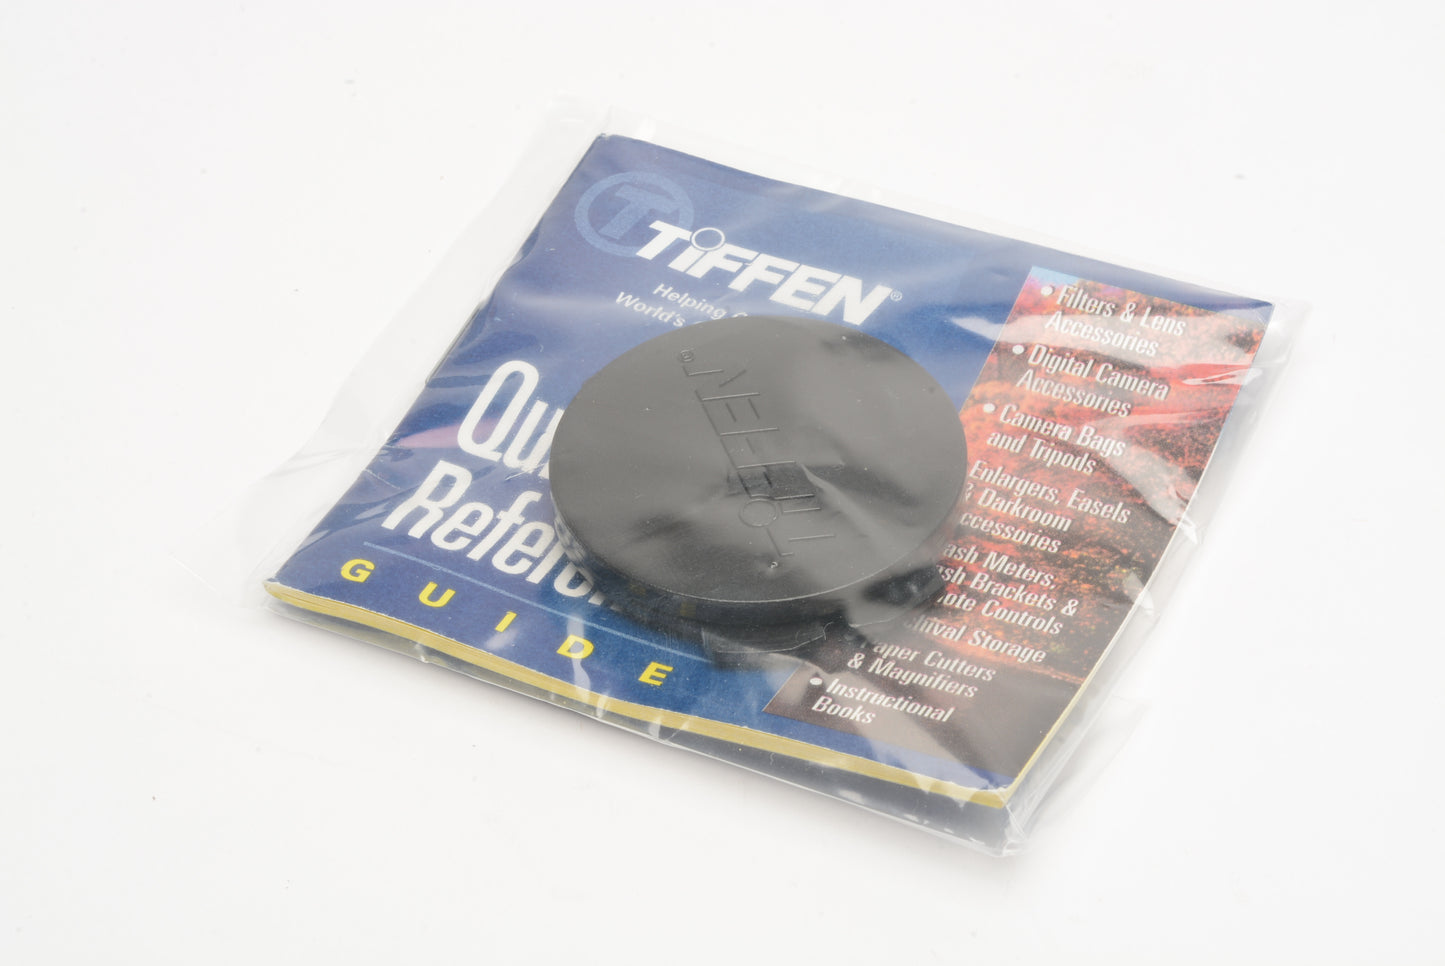 Set of 3X Tiffen 37mm filters in pouch:  UV, ND .6, FL-D, and lens cap